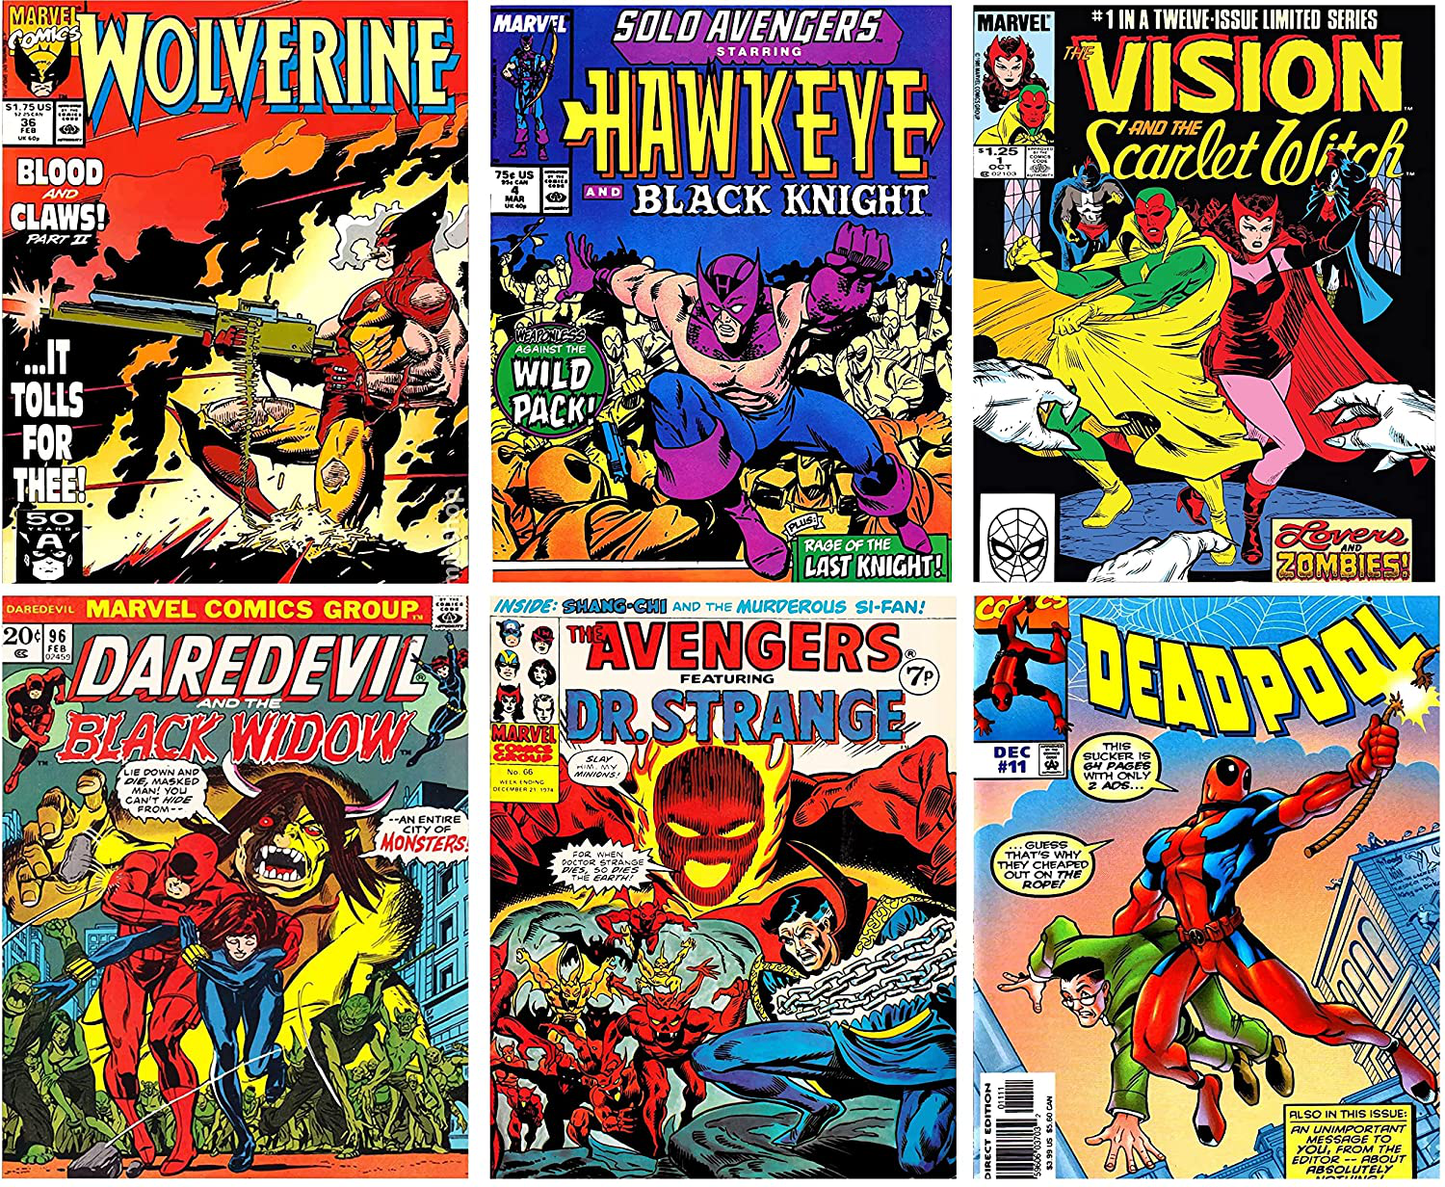 Avengers Wall Art – Superhero Vintage Comic Books Décor Unframed Set of 6 Prints, 8x10 Inch, Super Heroes Poster Room Decor Black Widow Dr Strange Dead Pool Wolverine Hawk Eye Vision & Scarlet Witch, Vintage Posters for Kids Adults Boys Bedroom (Yellow)